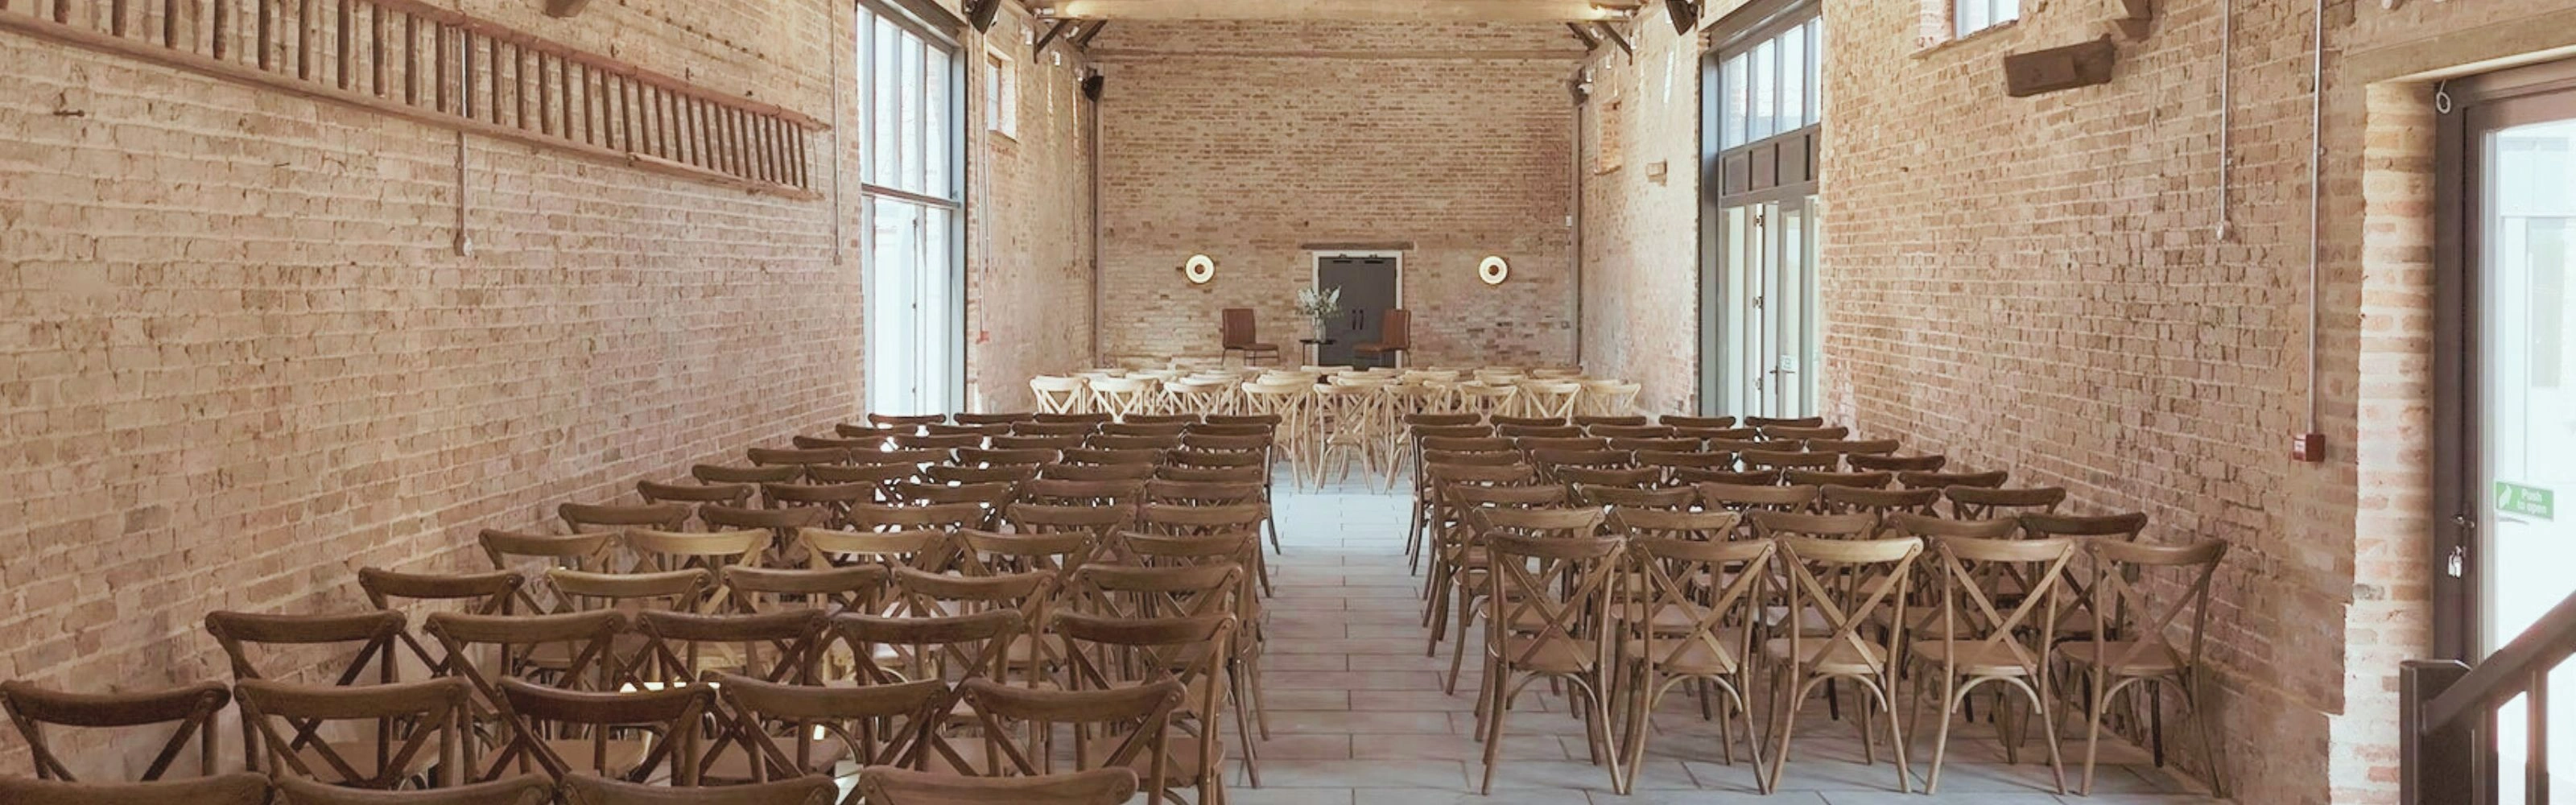 Internal of conference barn